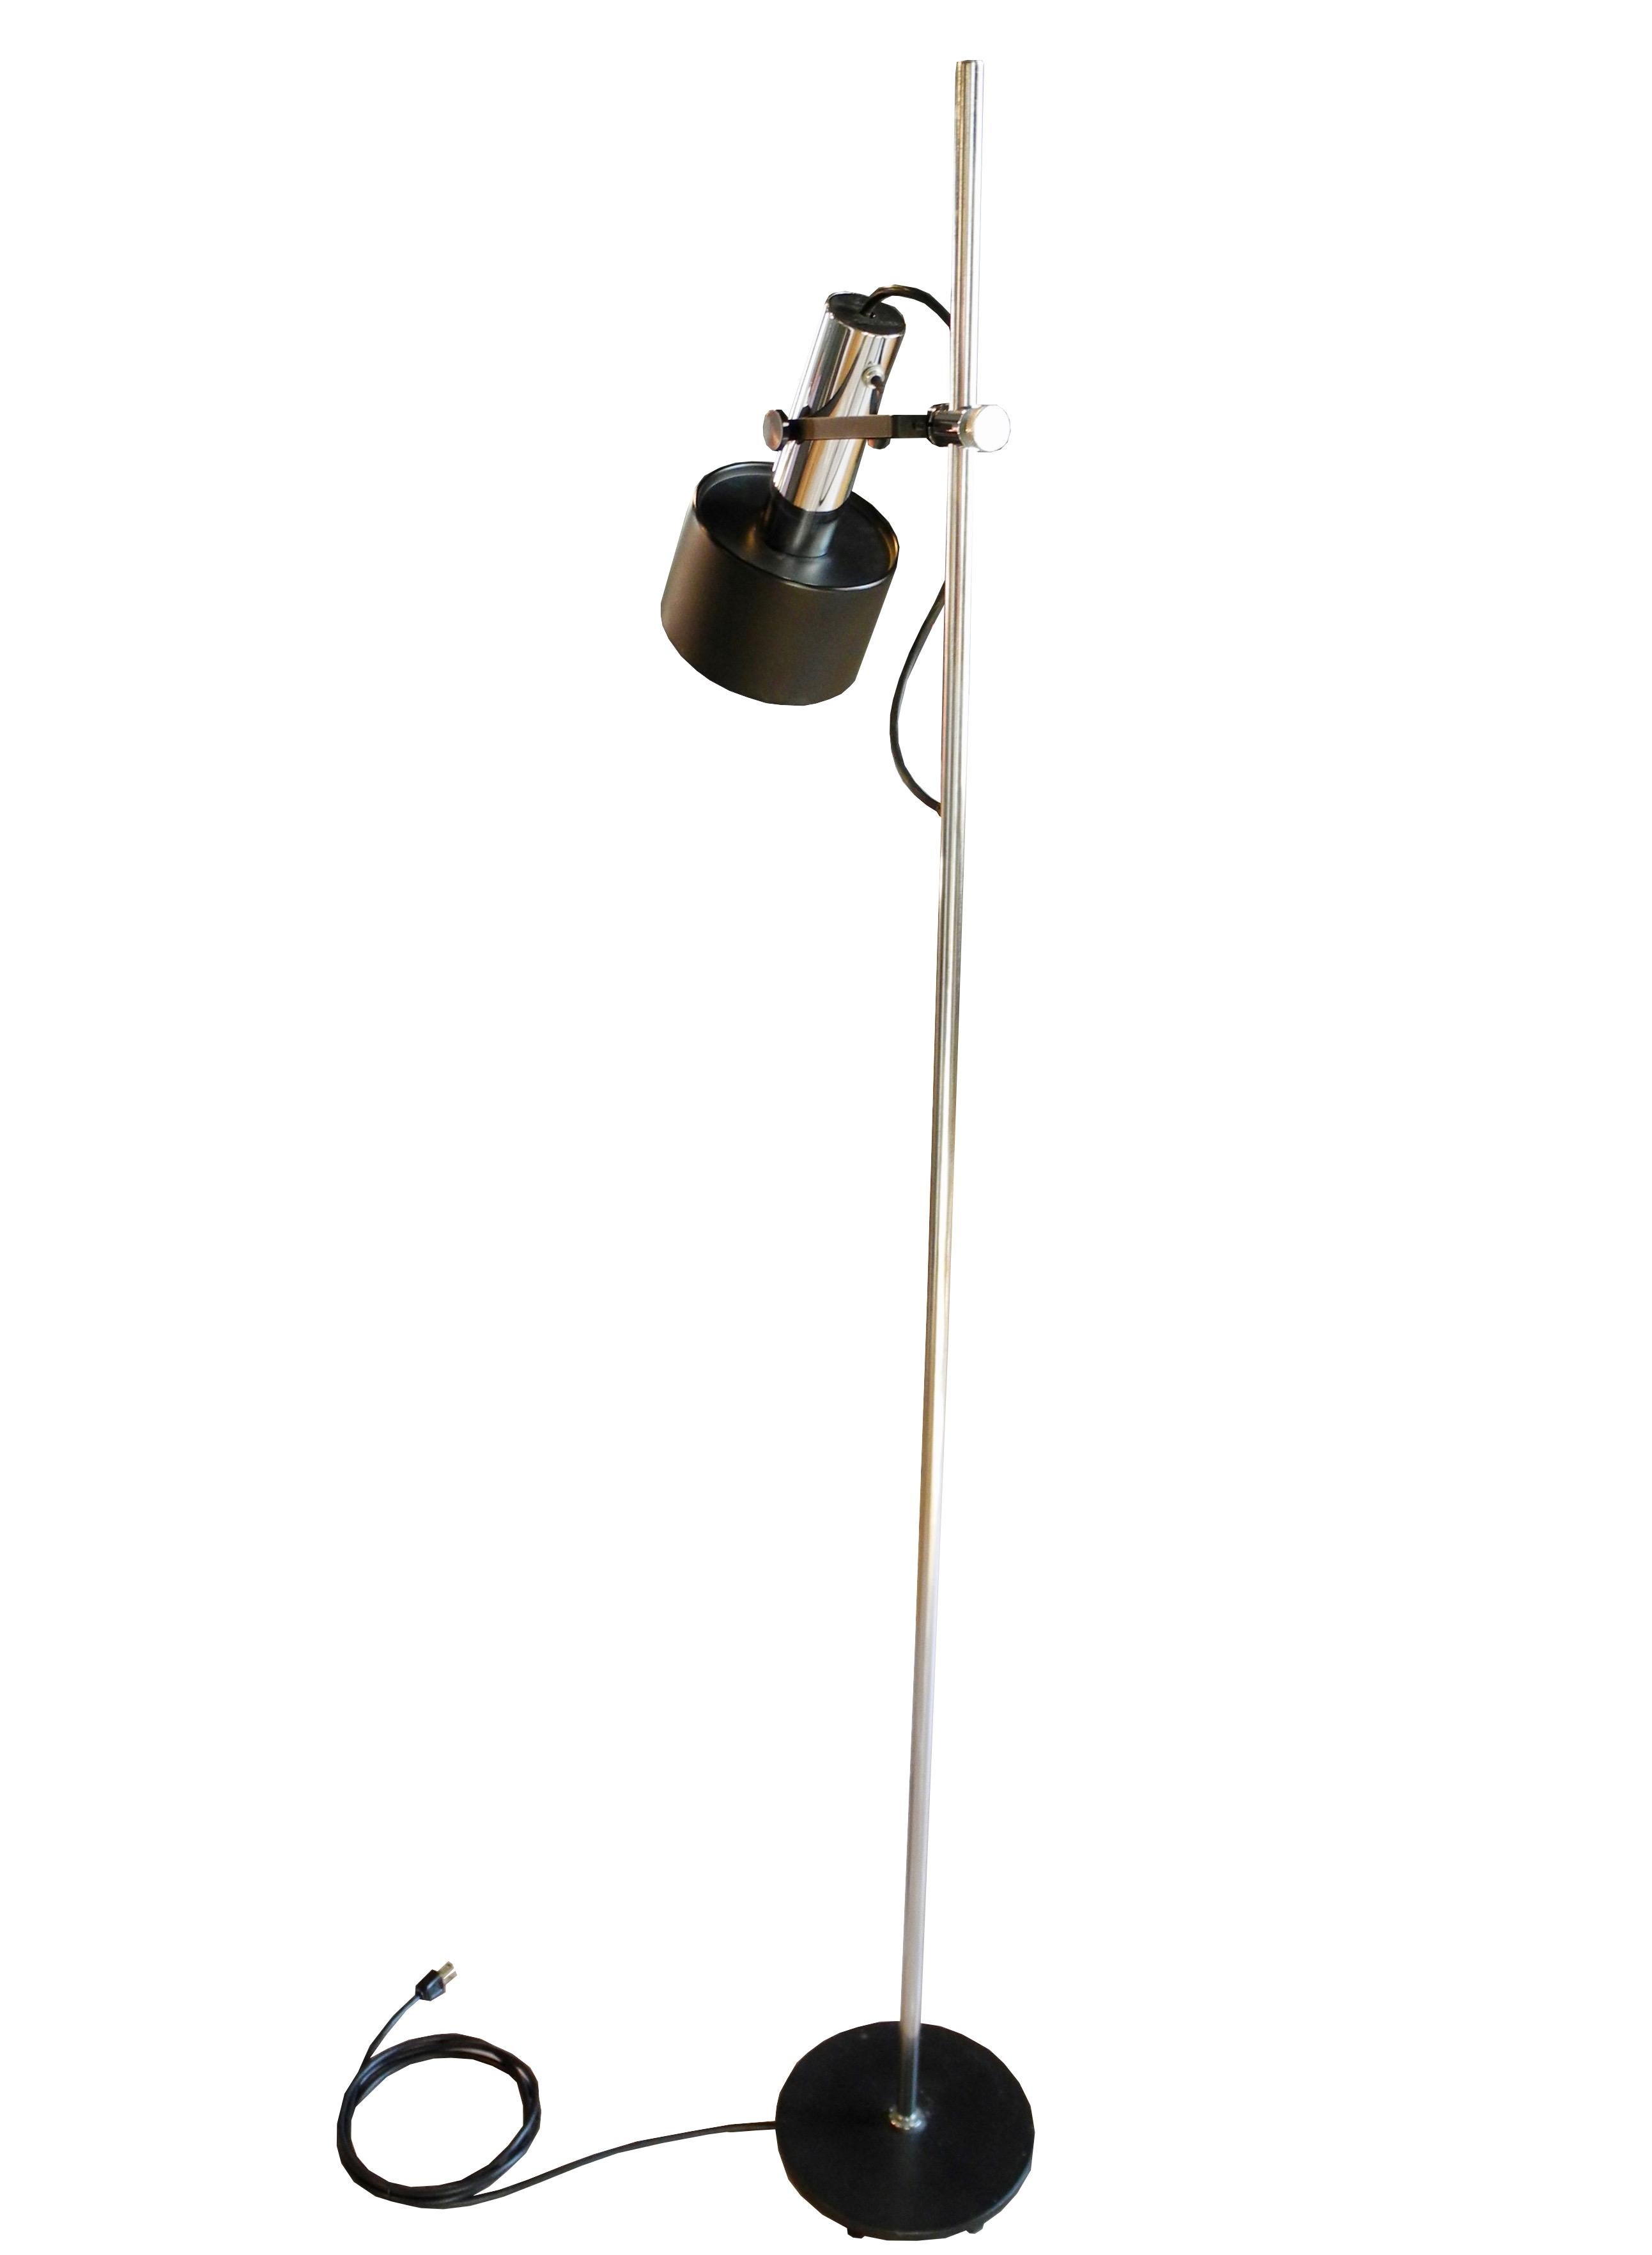 This modern adjustable versatile floor lamp goes up and down the rod and swivels all around on the arm. The lamp has a weighted iron base and works perfectly.